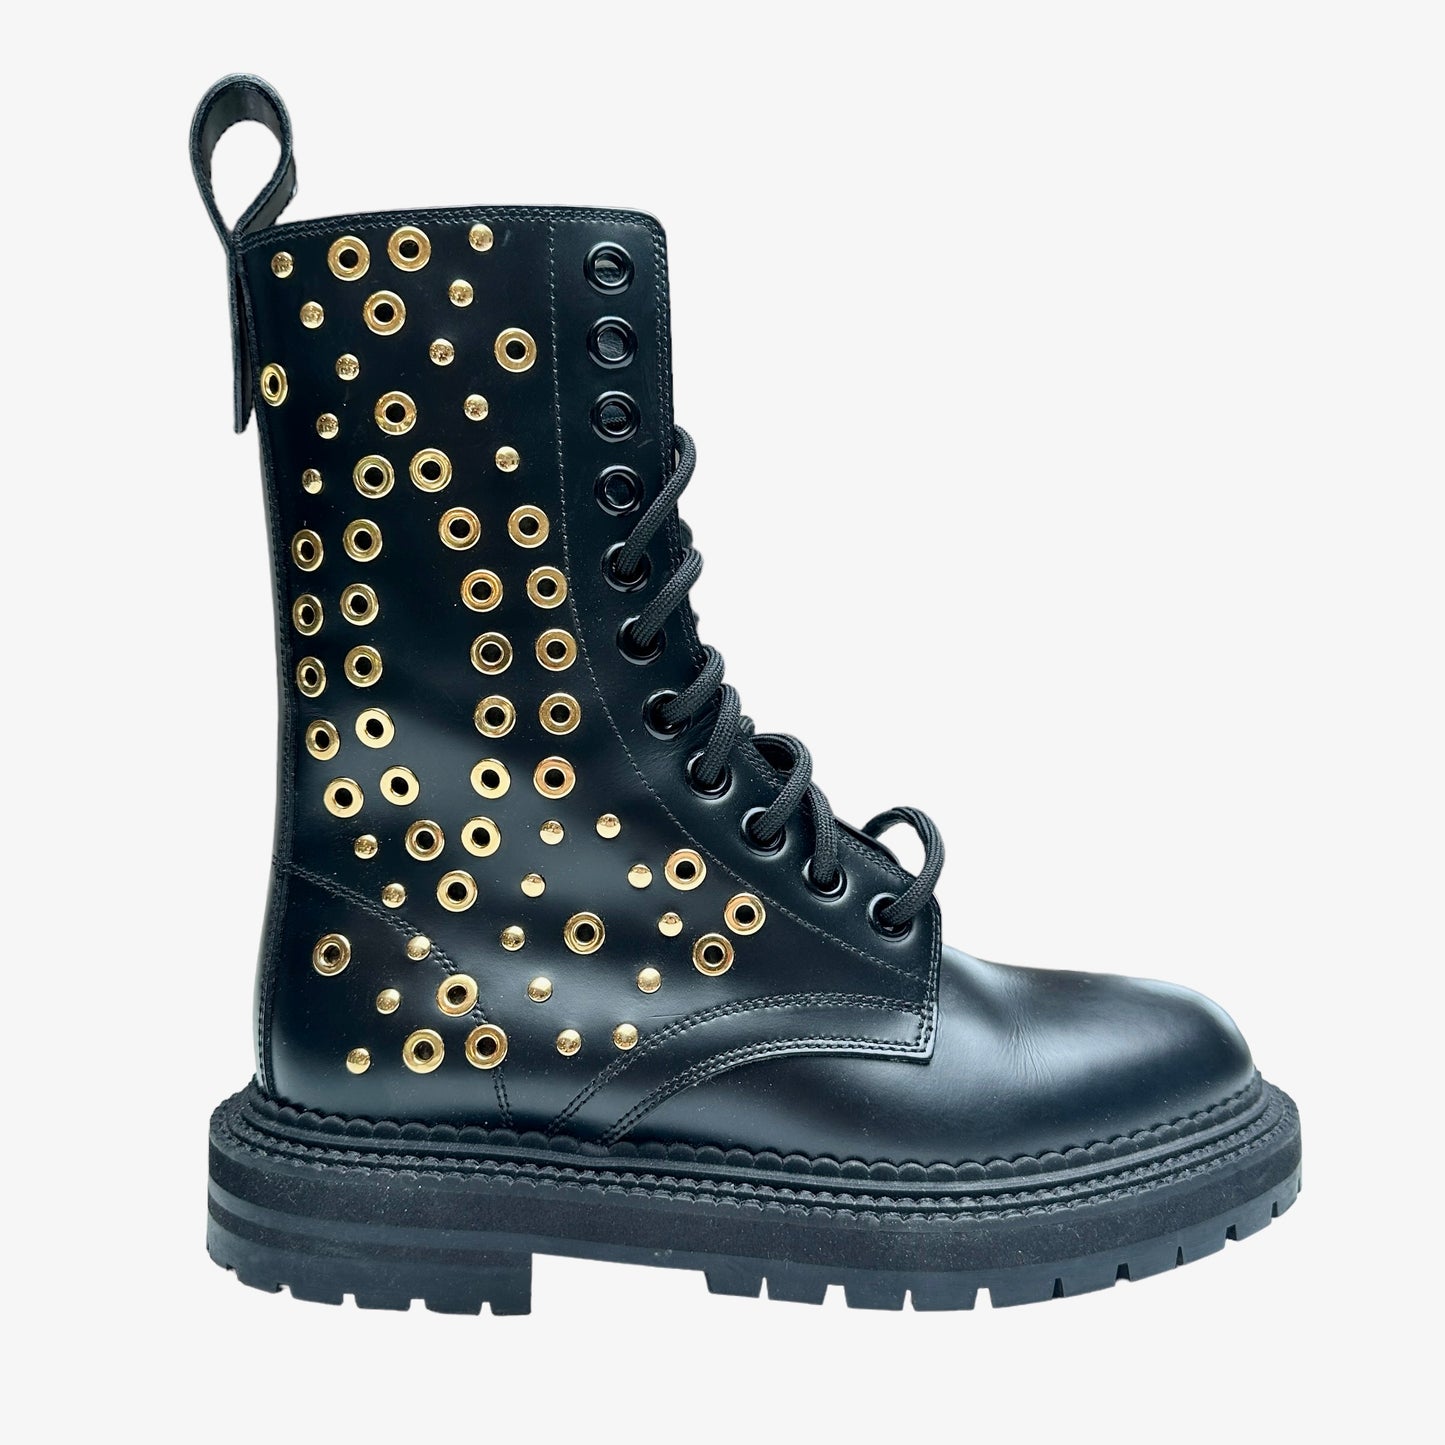 Studded Combat Boots - 7